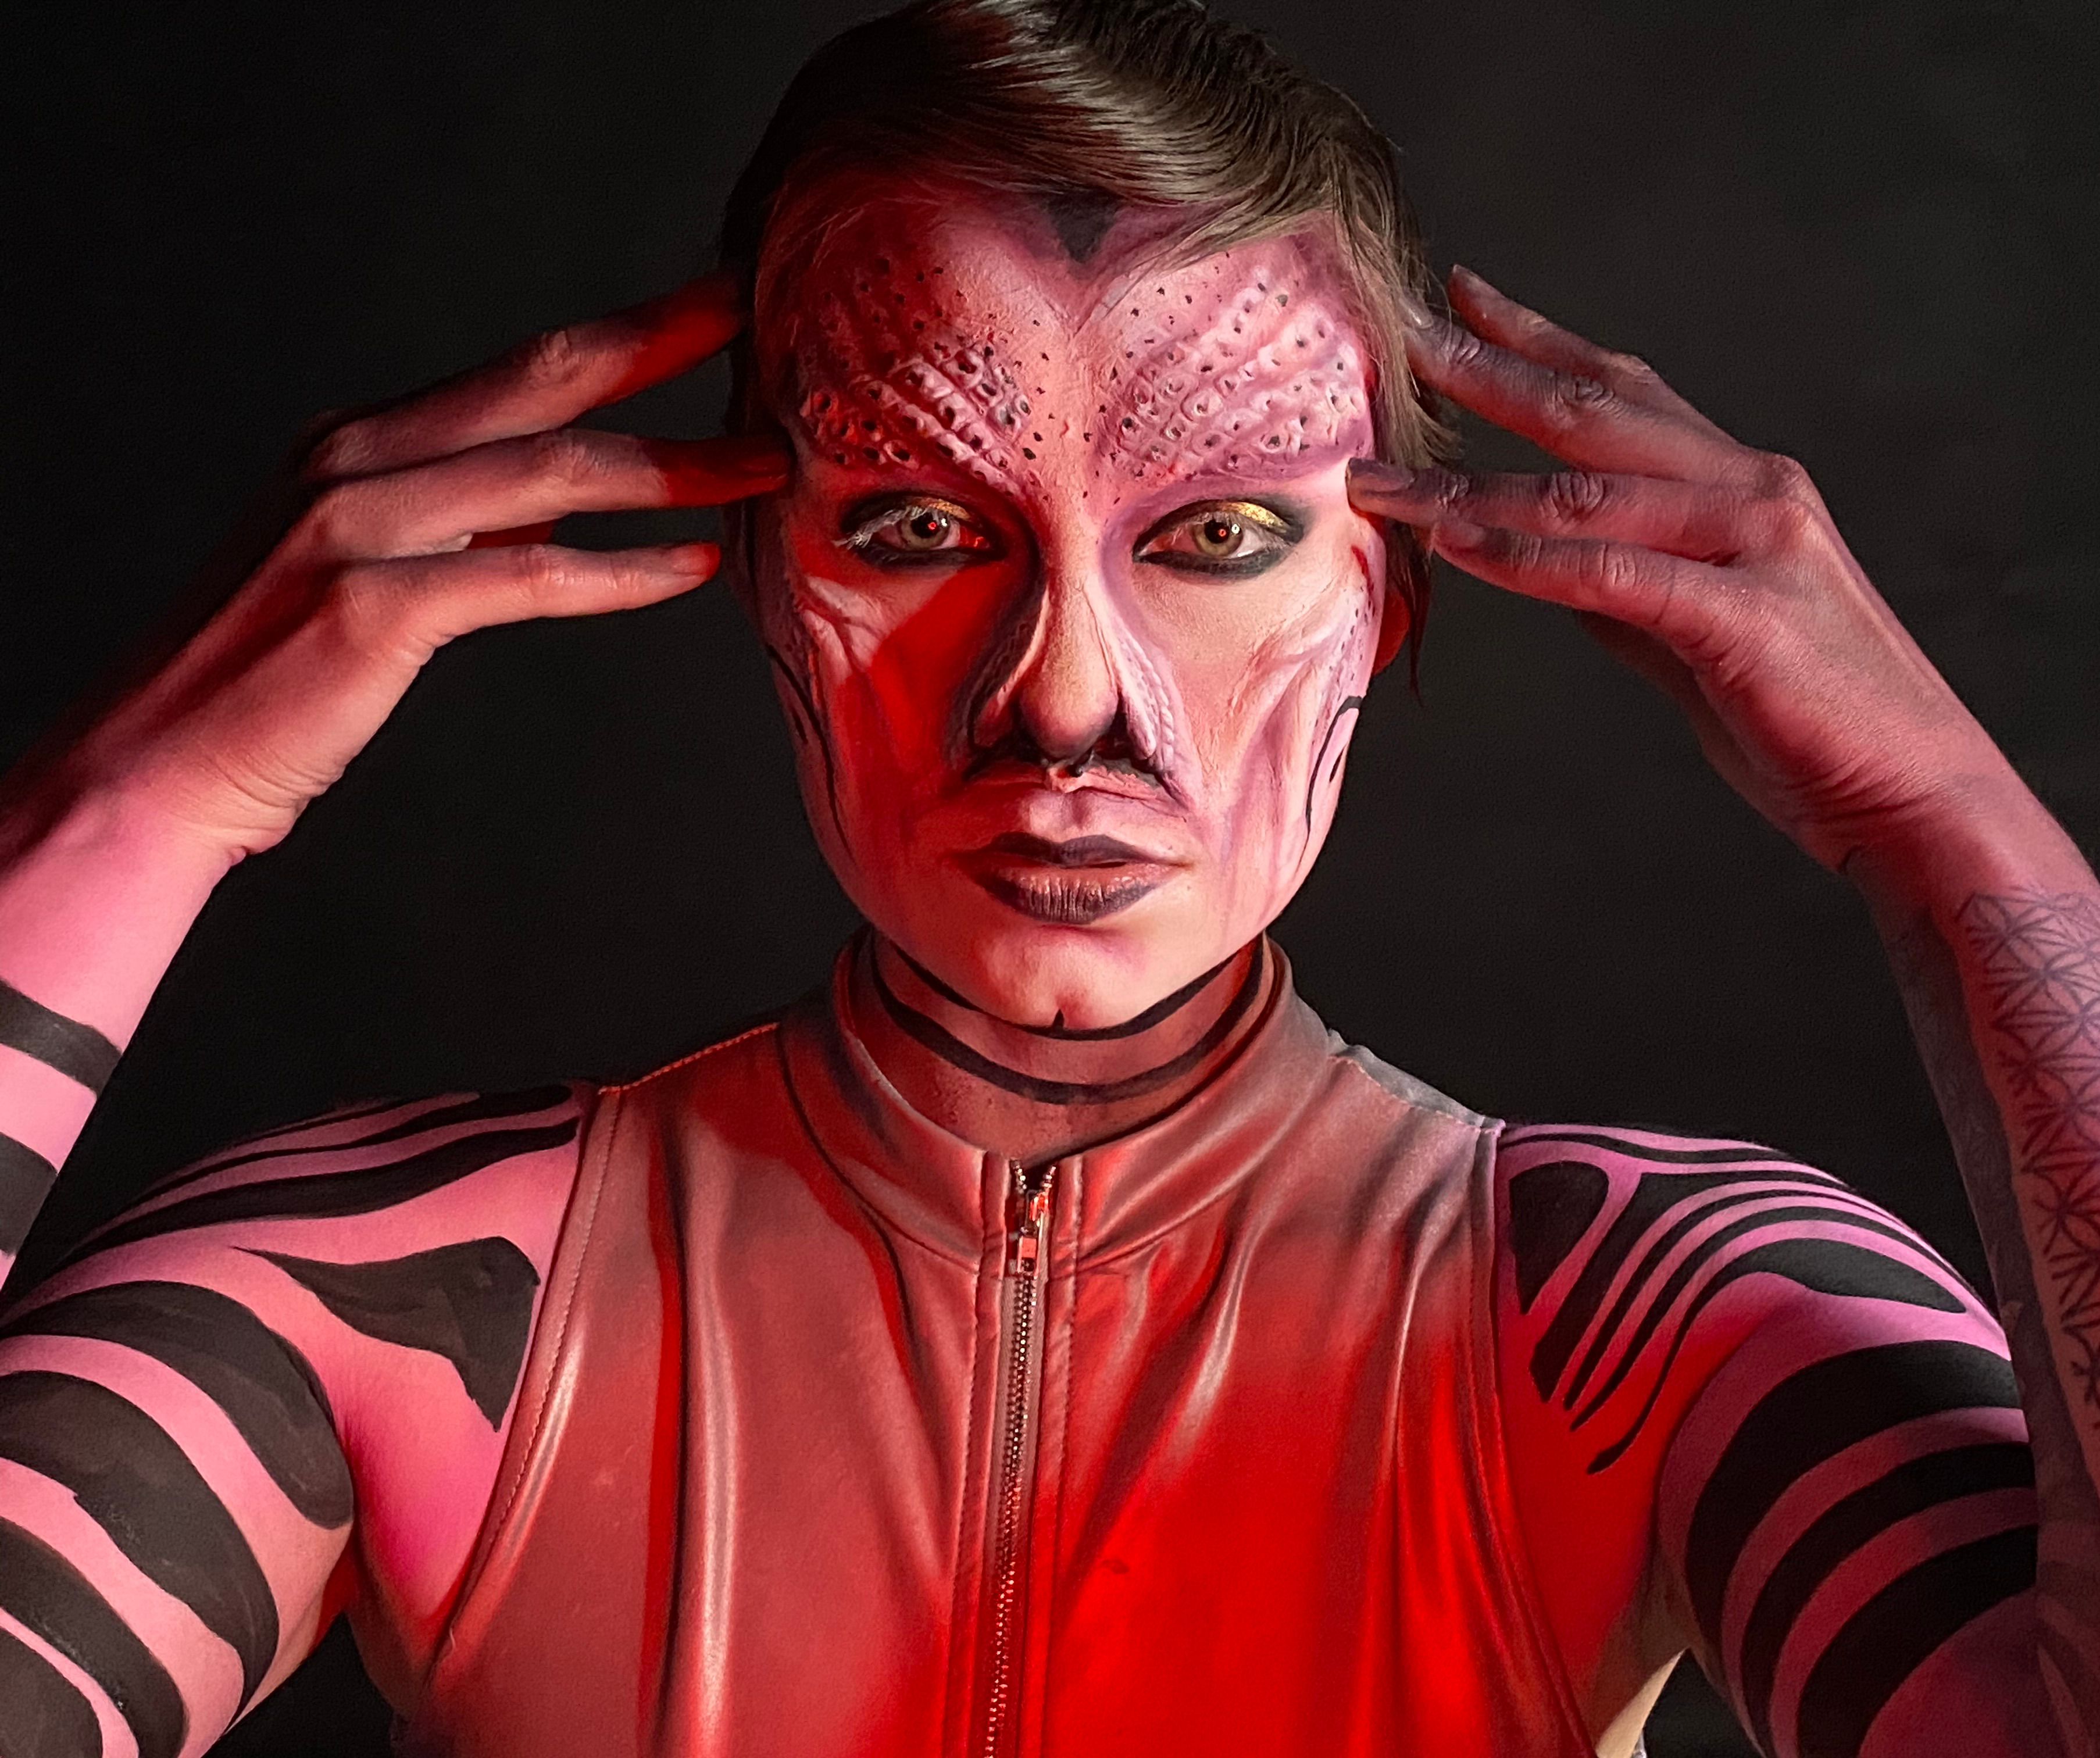 Special FX vs prosthetic makeup of man who looks like a red tiger